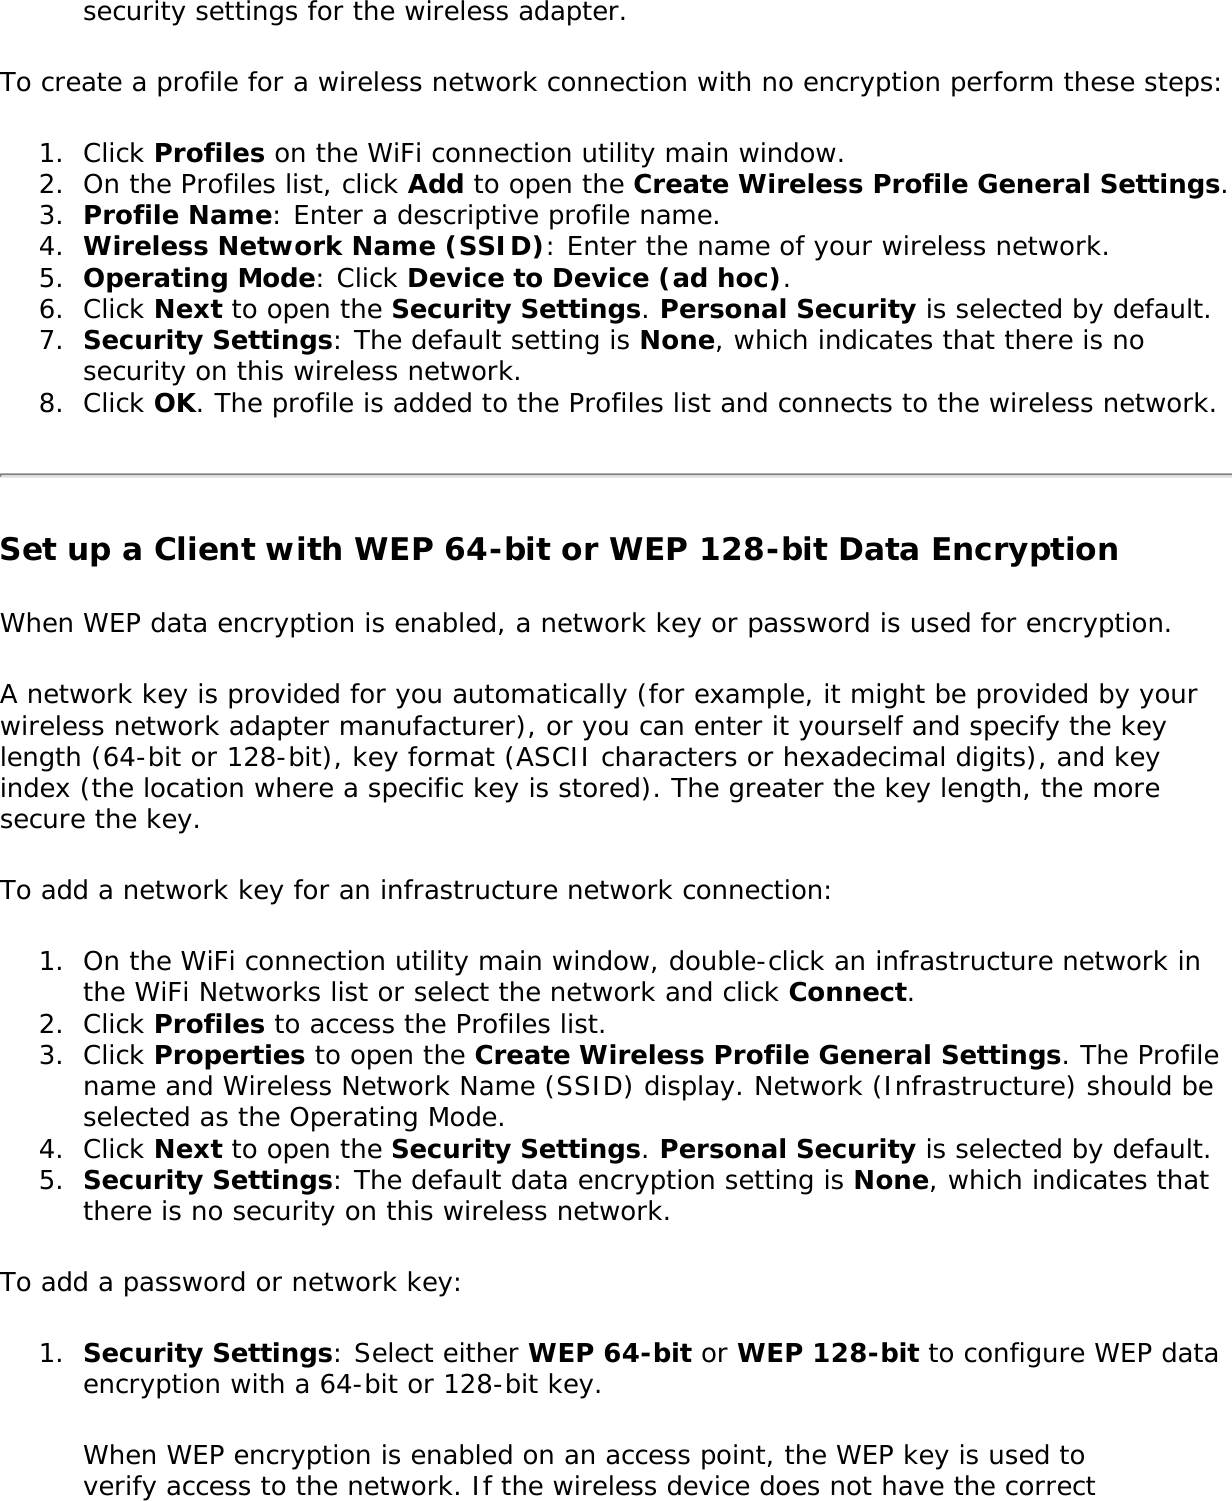 security settings for the wireless adapter.To create a profile for a wireless network connection with no encryption perform these steps:1.  Click Profiles on the WiFi connection utility main window.2.  On the Profiles list, click Add to open the Create Wireless Profile General Settings.3.  Profile Name: Enter a descriptive profile name.4.  Wireless Network Name (SSID): Enter the name of your wireless network.5.  Operating Mode: Click Device to Device (ad hoc). 6.  Click Next to open the Security Settings. Personal Security is selected by default.7.  Security Settings: The default setting is None, which indicates that there is no security on this wireless network.8.  Click OK. The profile is added to the Profiles list and connects to the wireless network.Set up a Client with WEP 64-bit or WEP 128-bit Data EncryptionWhen WEP data encryption is enabled, a network key or password is used for encryption.A network key is provided for you automatically (for example, it might be provided by your wireless network adapter manufacturer), or you can enter it yourself and specify the key length (64-bit or 128-bit), key format (ASCII characters or hexadecimal digits), and key index (the location where a specific key is stored). The greater the key length, the more secure the key.To add a network key for an infrastructure network connection:1.  On the WiFi connection utility main window, double-click an infrastructure network in the WiFi Networks list or select the network and click Connect.2.  Click Profiles to access the Profiles list.3.  Click Properties to open the Create Wireless Profile General Settings. The Profile name and Wireless Network Name (SSID) display. Network (Infrastructure) should be selected as the Operating Mode.4.  Click Next to open the Security Settings. Personal Security is selected by default. 5.  Security Settings: The default data encryption setting is None, which indicates that there is no security on this wireless network.To add a password or network key:1.  Security Settings: Select either WEP 64-bit or WEP 128-bit to configure WEP data encryption with a 64-bit or 128-bit key.When WEP encryption is enabled on an access point, the WEP key is used to verify access to the network. If the wireless device does not have the correct 